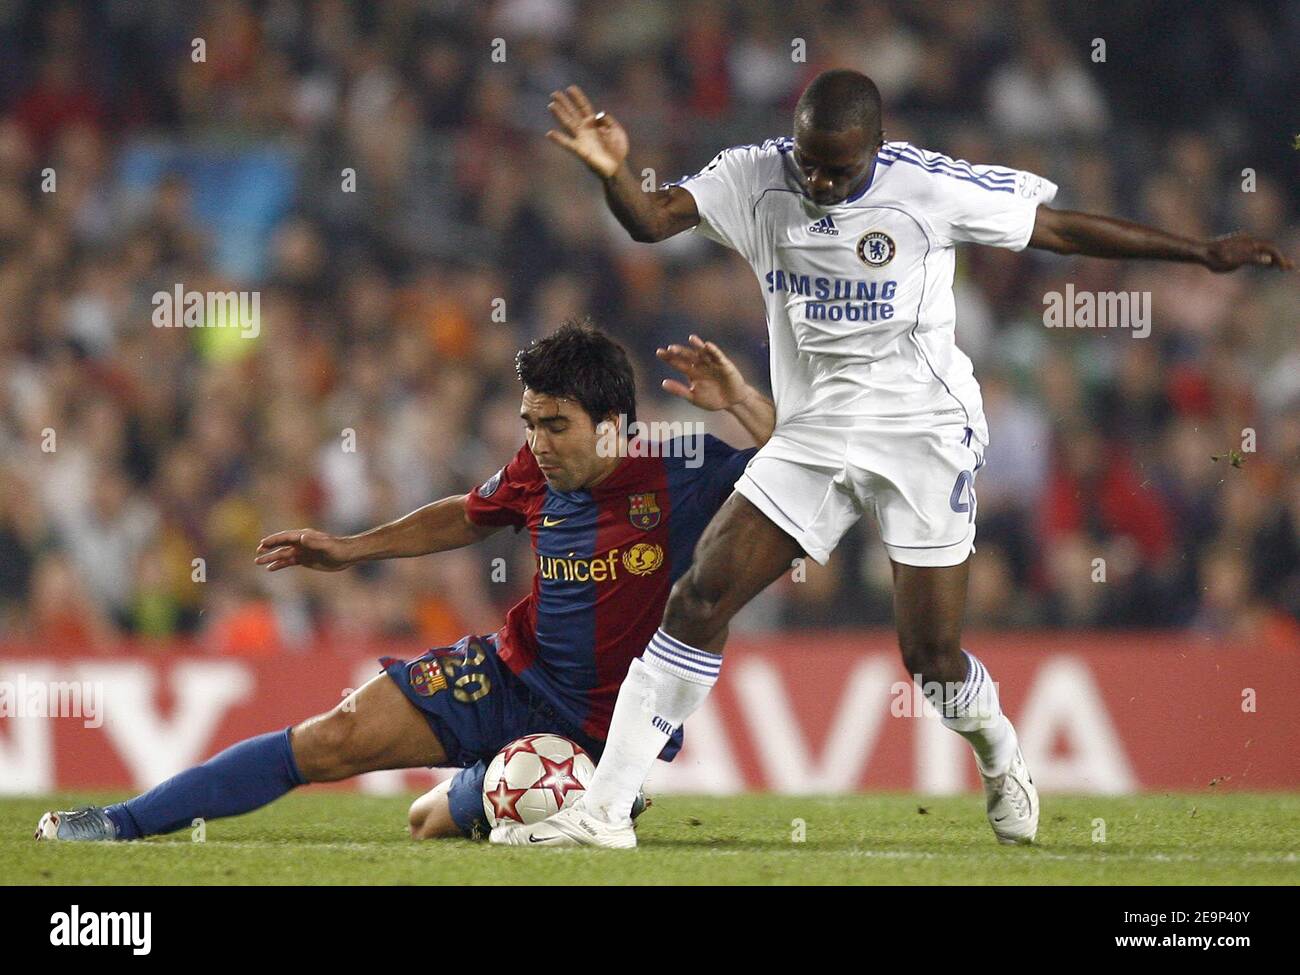 Barcelona's Deco and Chelsea's Claude Makelele battle for the ball during the UEFA Champions League, Group A, Barcelona vs Chelsea at the Camp Nou stadium in Barcelona, Spain on October 31, 2006. The match ended in a 2-2 draw. Photo by Christian Liewig/ABACAPRESS.COM Stock Photo